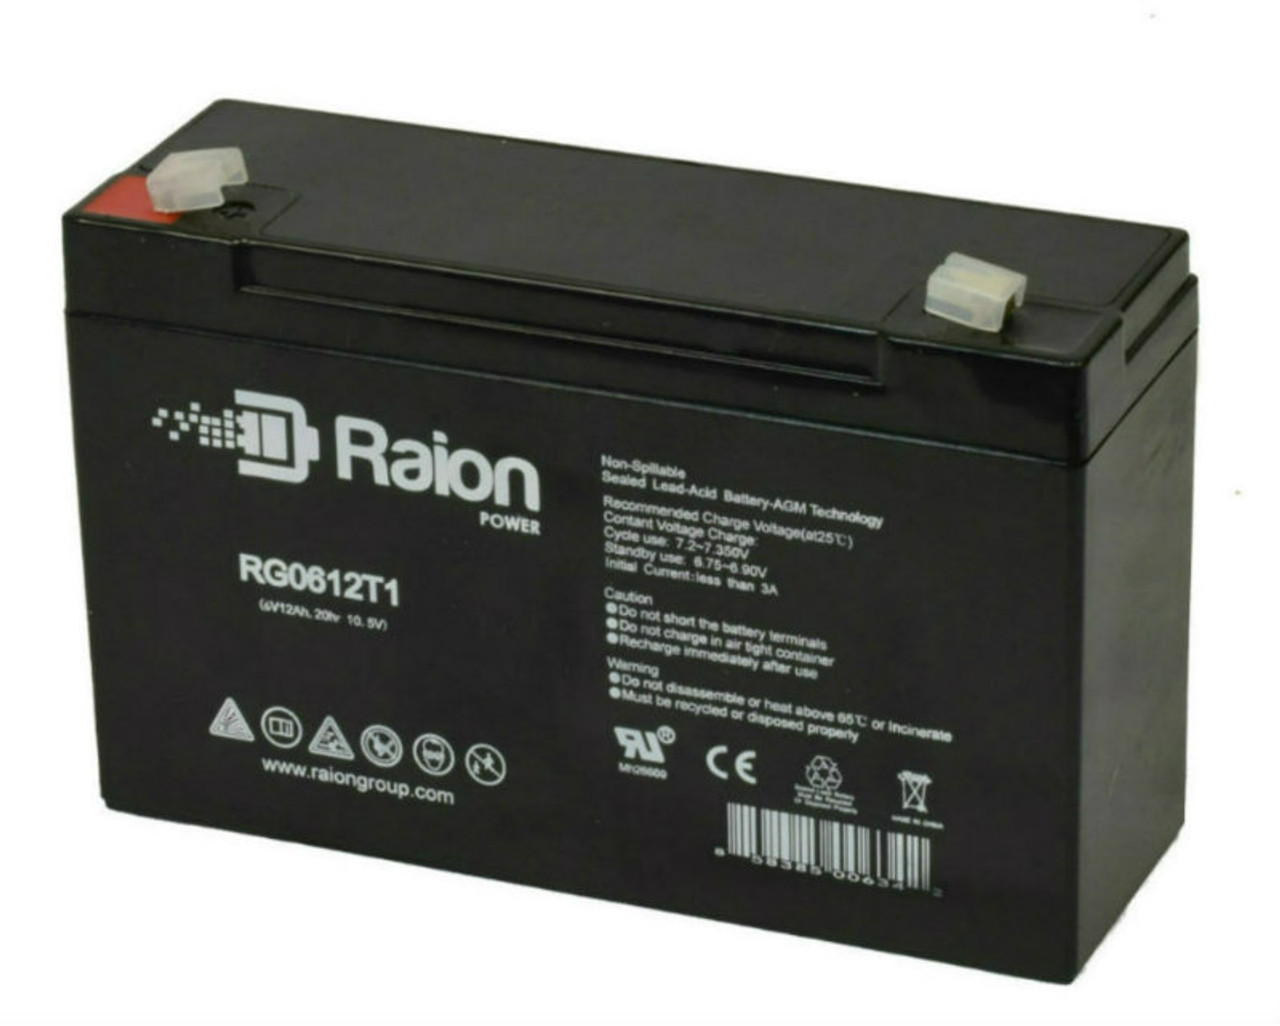 Raion Power RG06120T1 Replacement Emergency Light Battery for Dual Lite 12-723